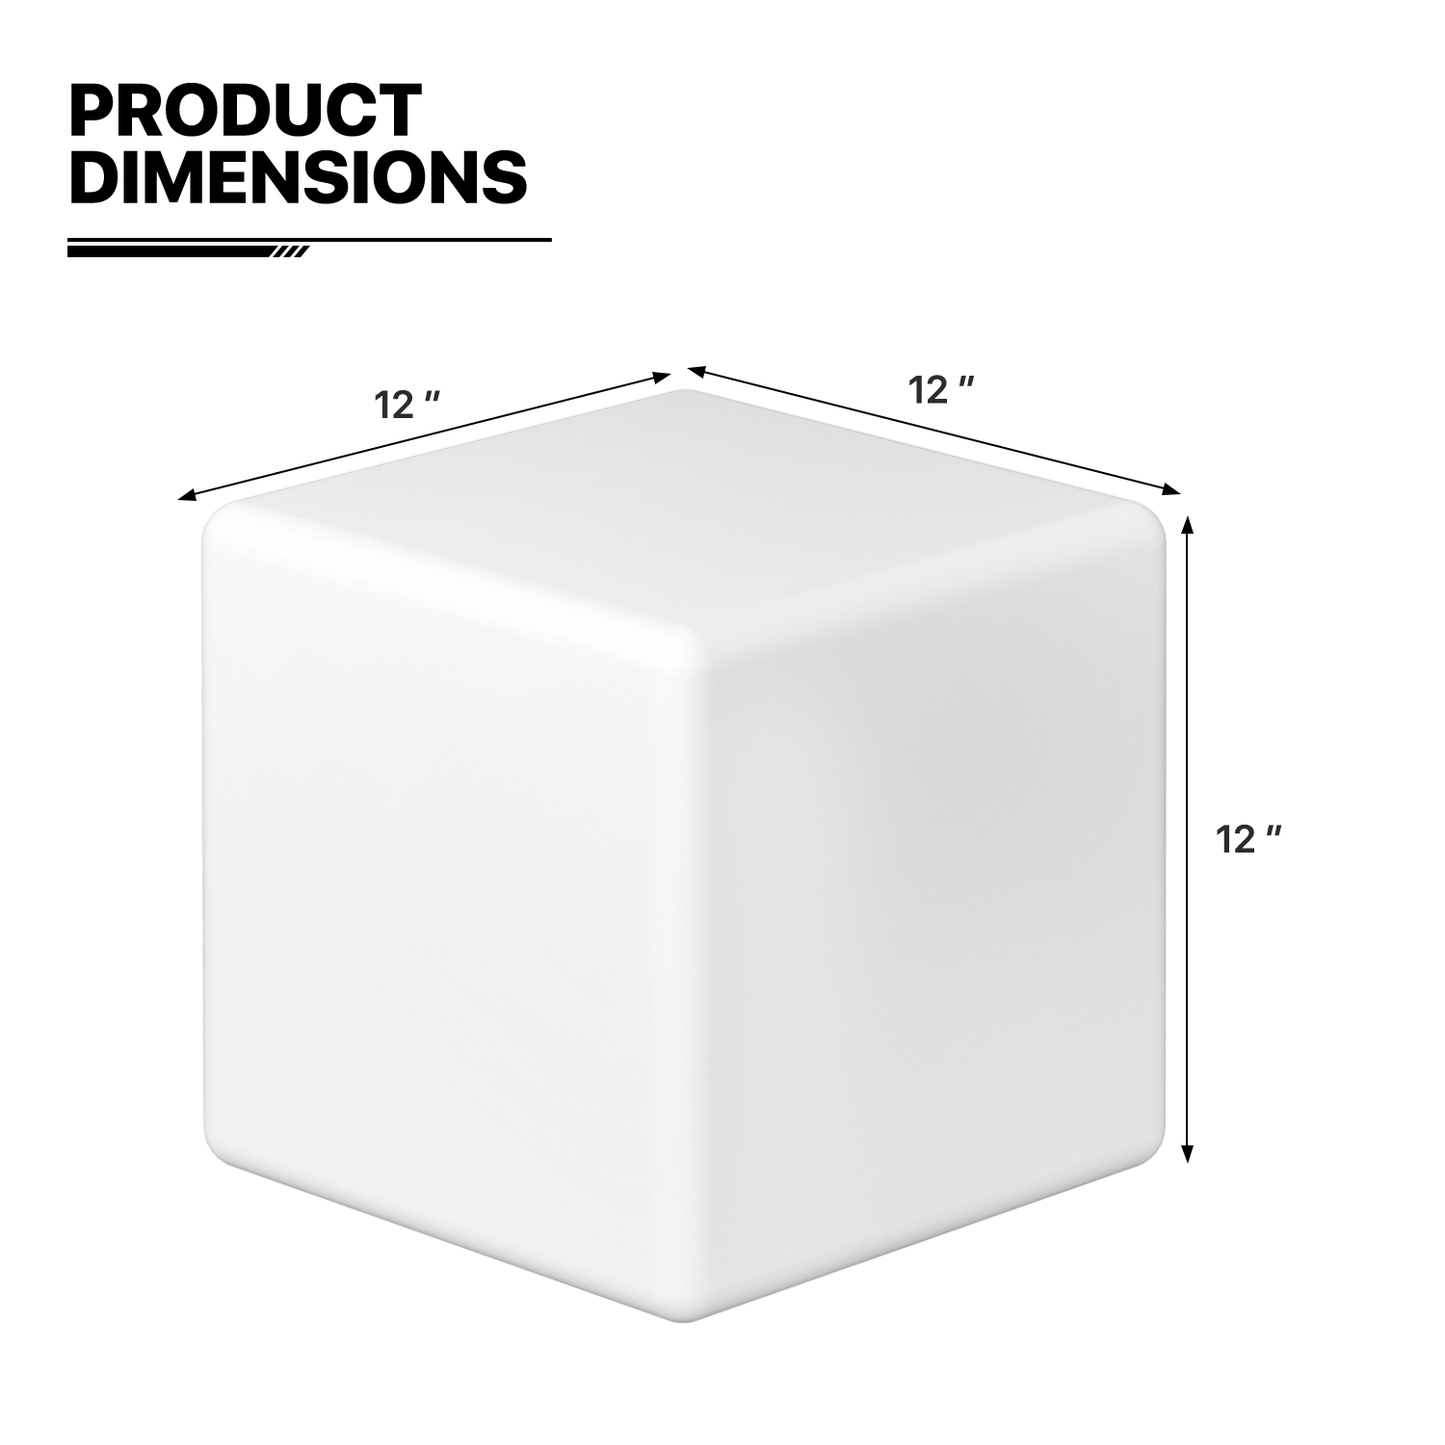 LED - Stool - 12''Cube - 16 Colors Remote Control